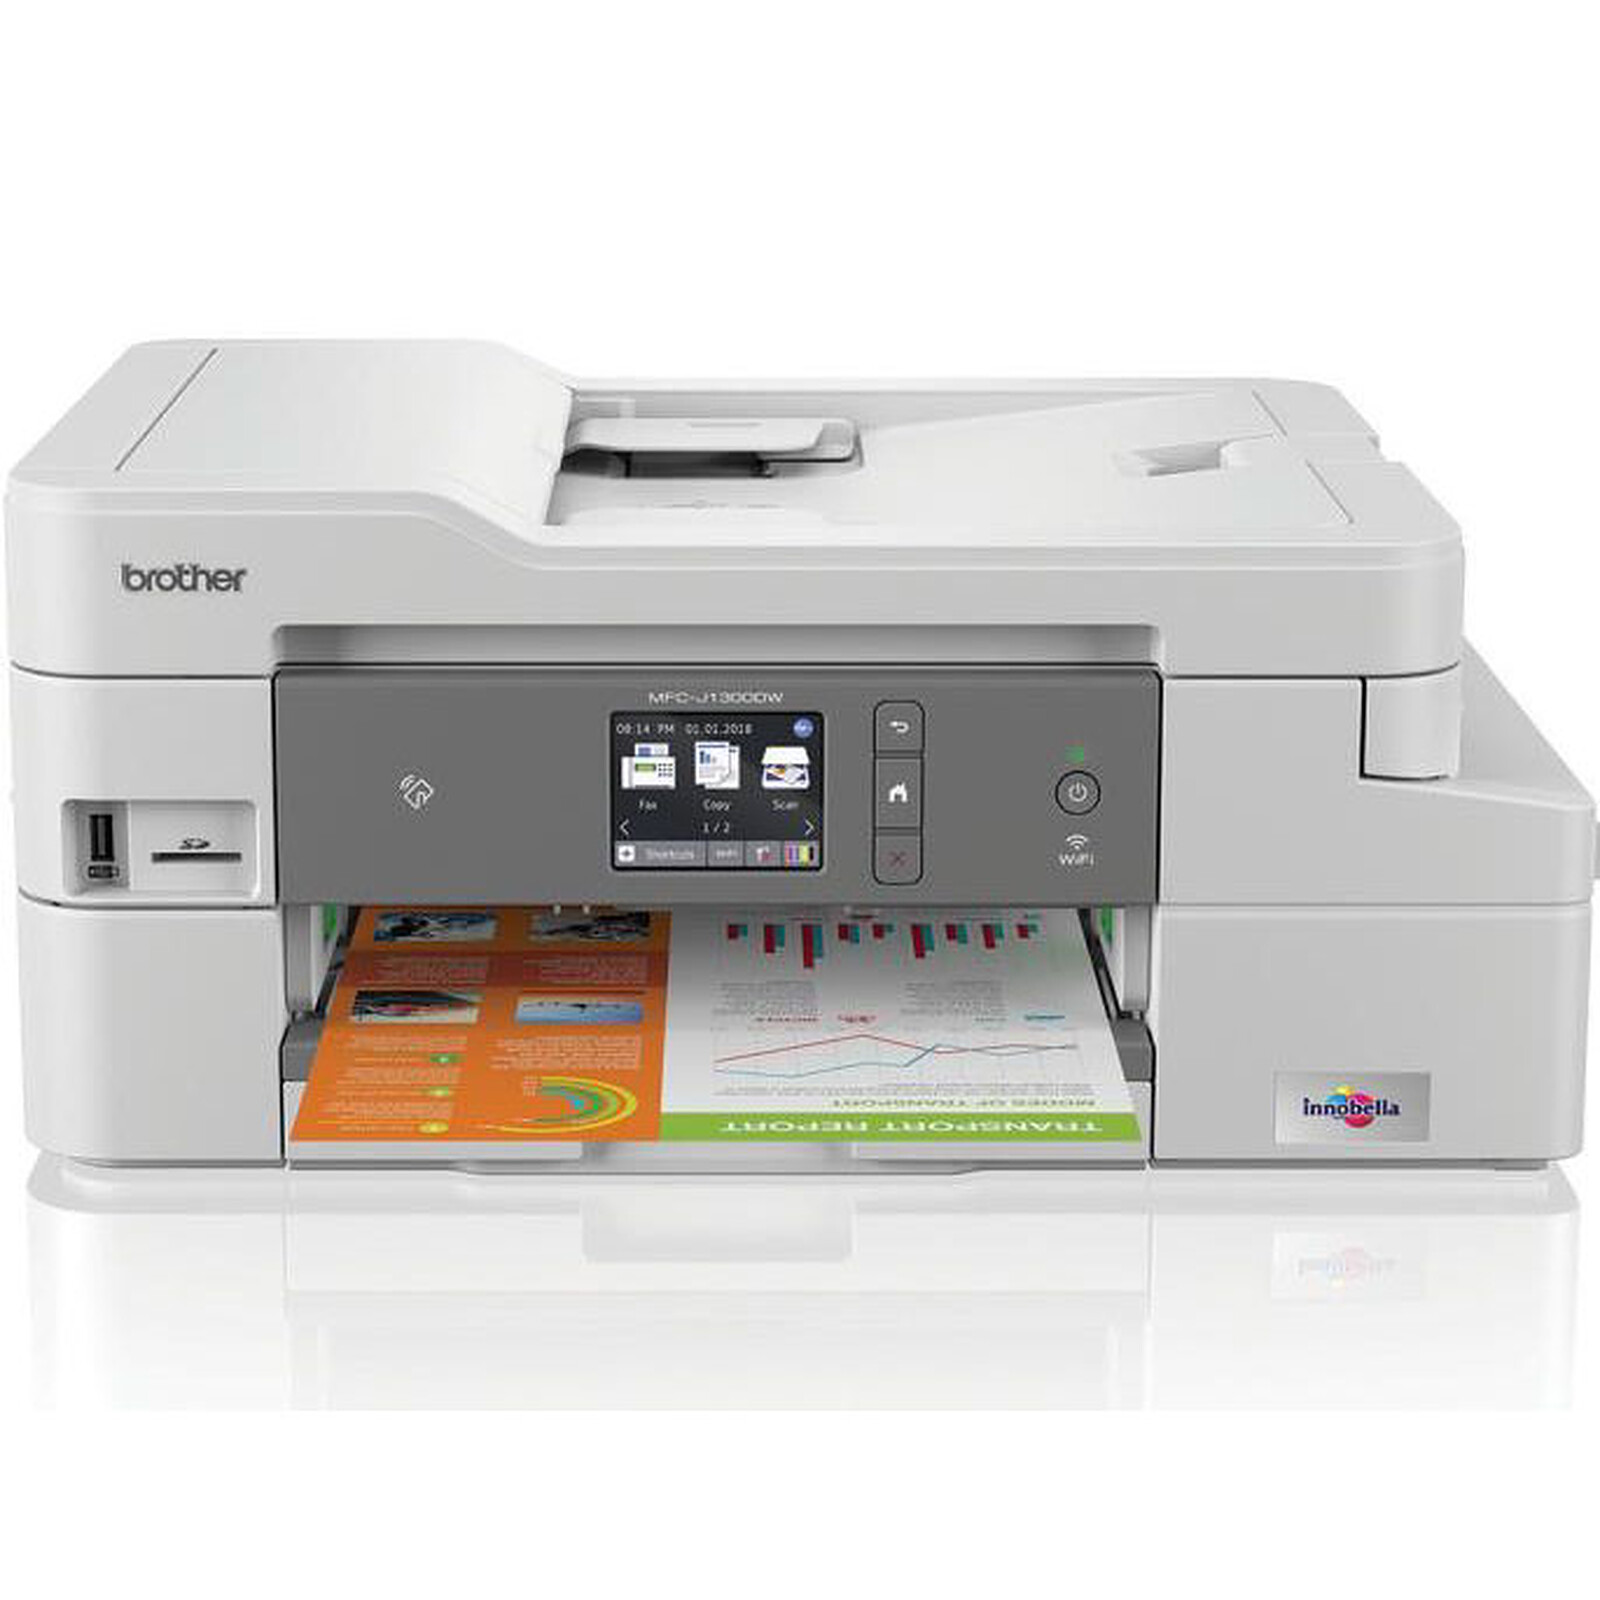 Brother MFC-L8390CDW - All-in-one printer - LDLC 3-year warranty